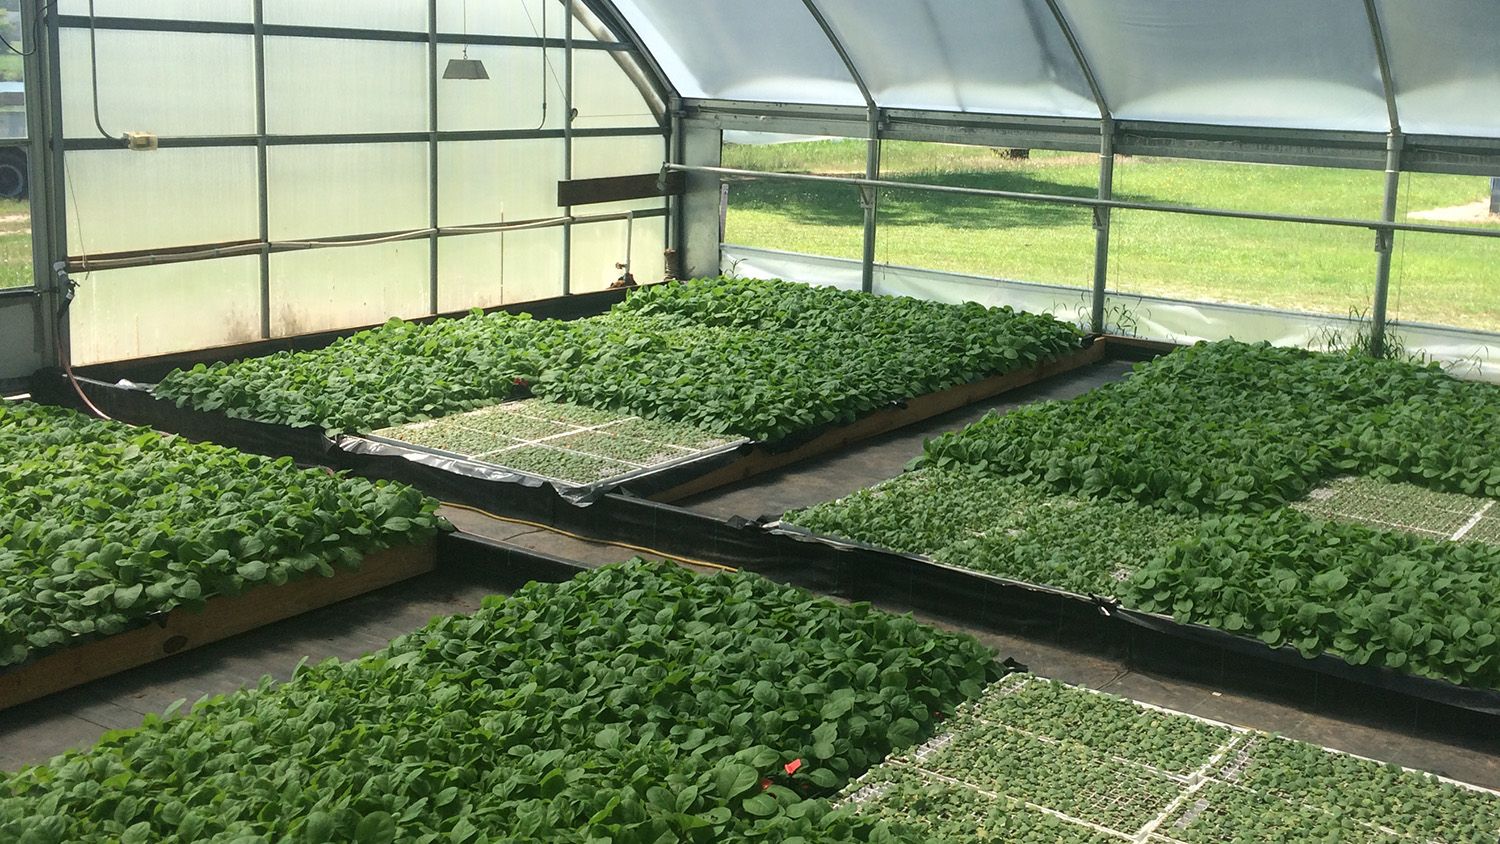 Tobacco seedlings in a greenhouse